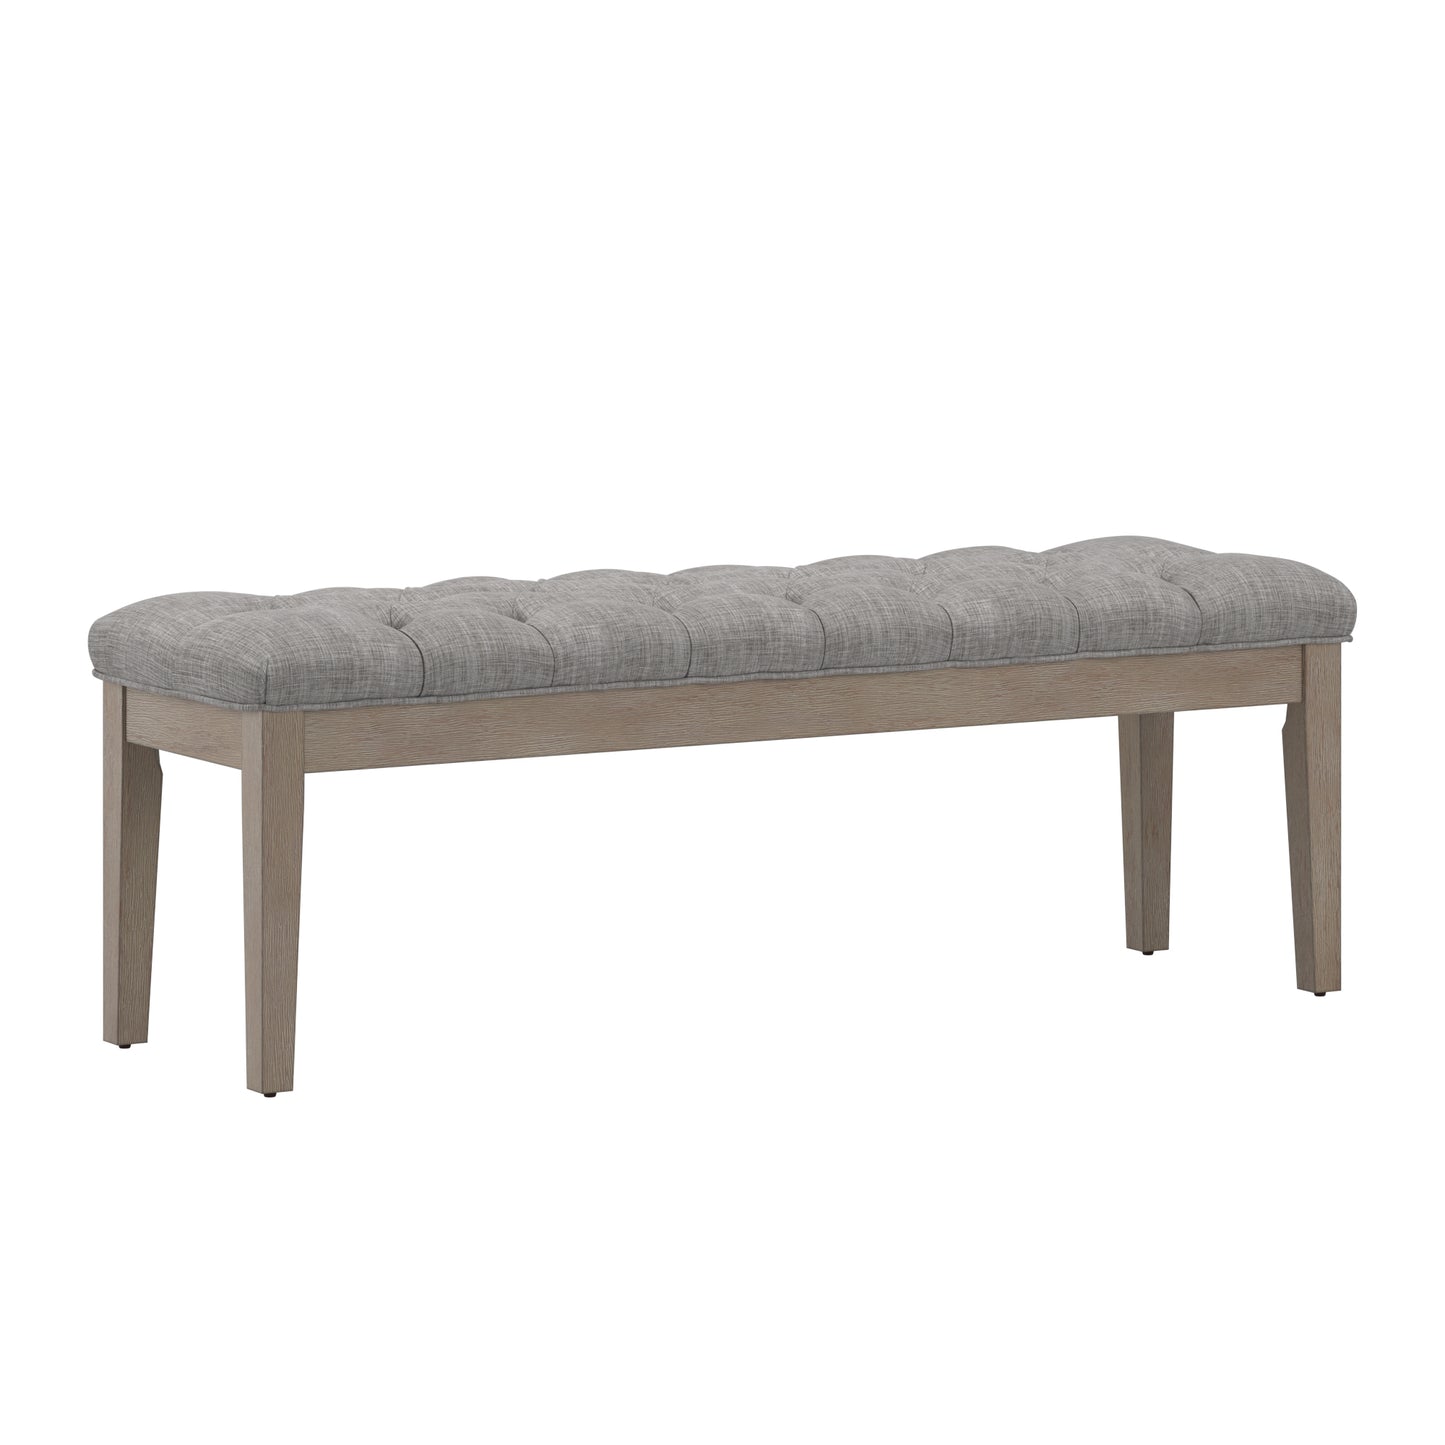 Premium Tufted Reclaimed Look 52-inch Upholstered Bench - Grey Linen